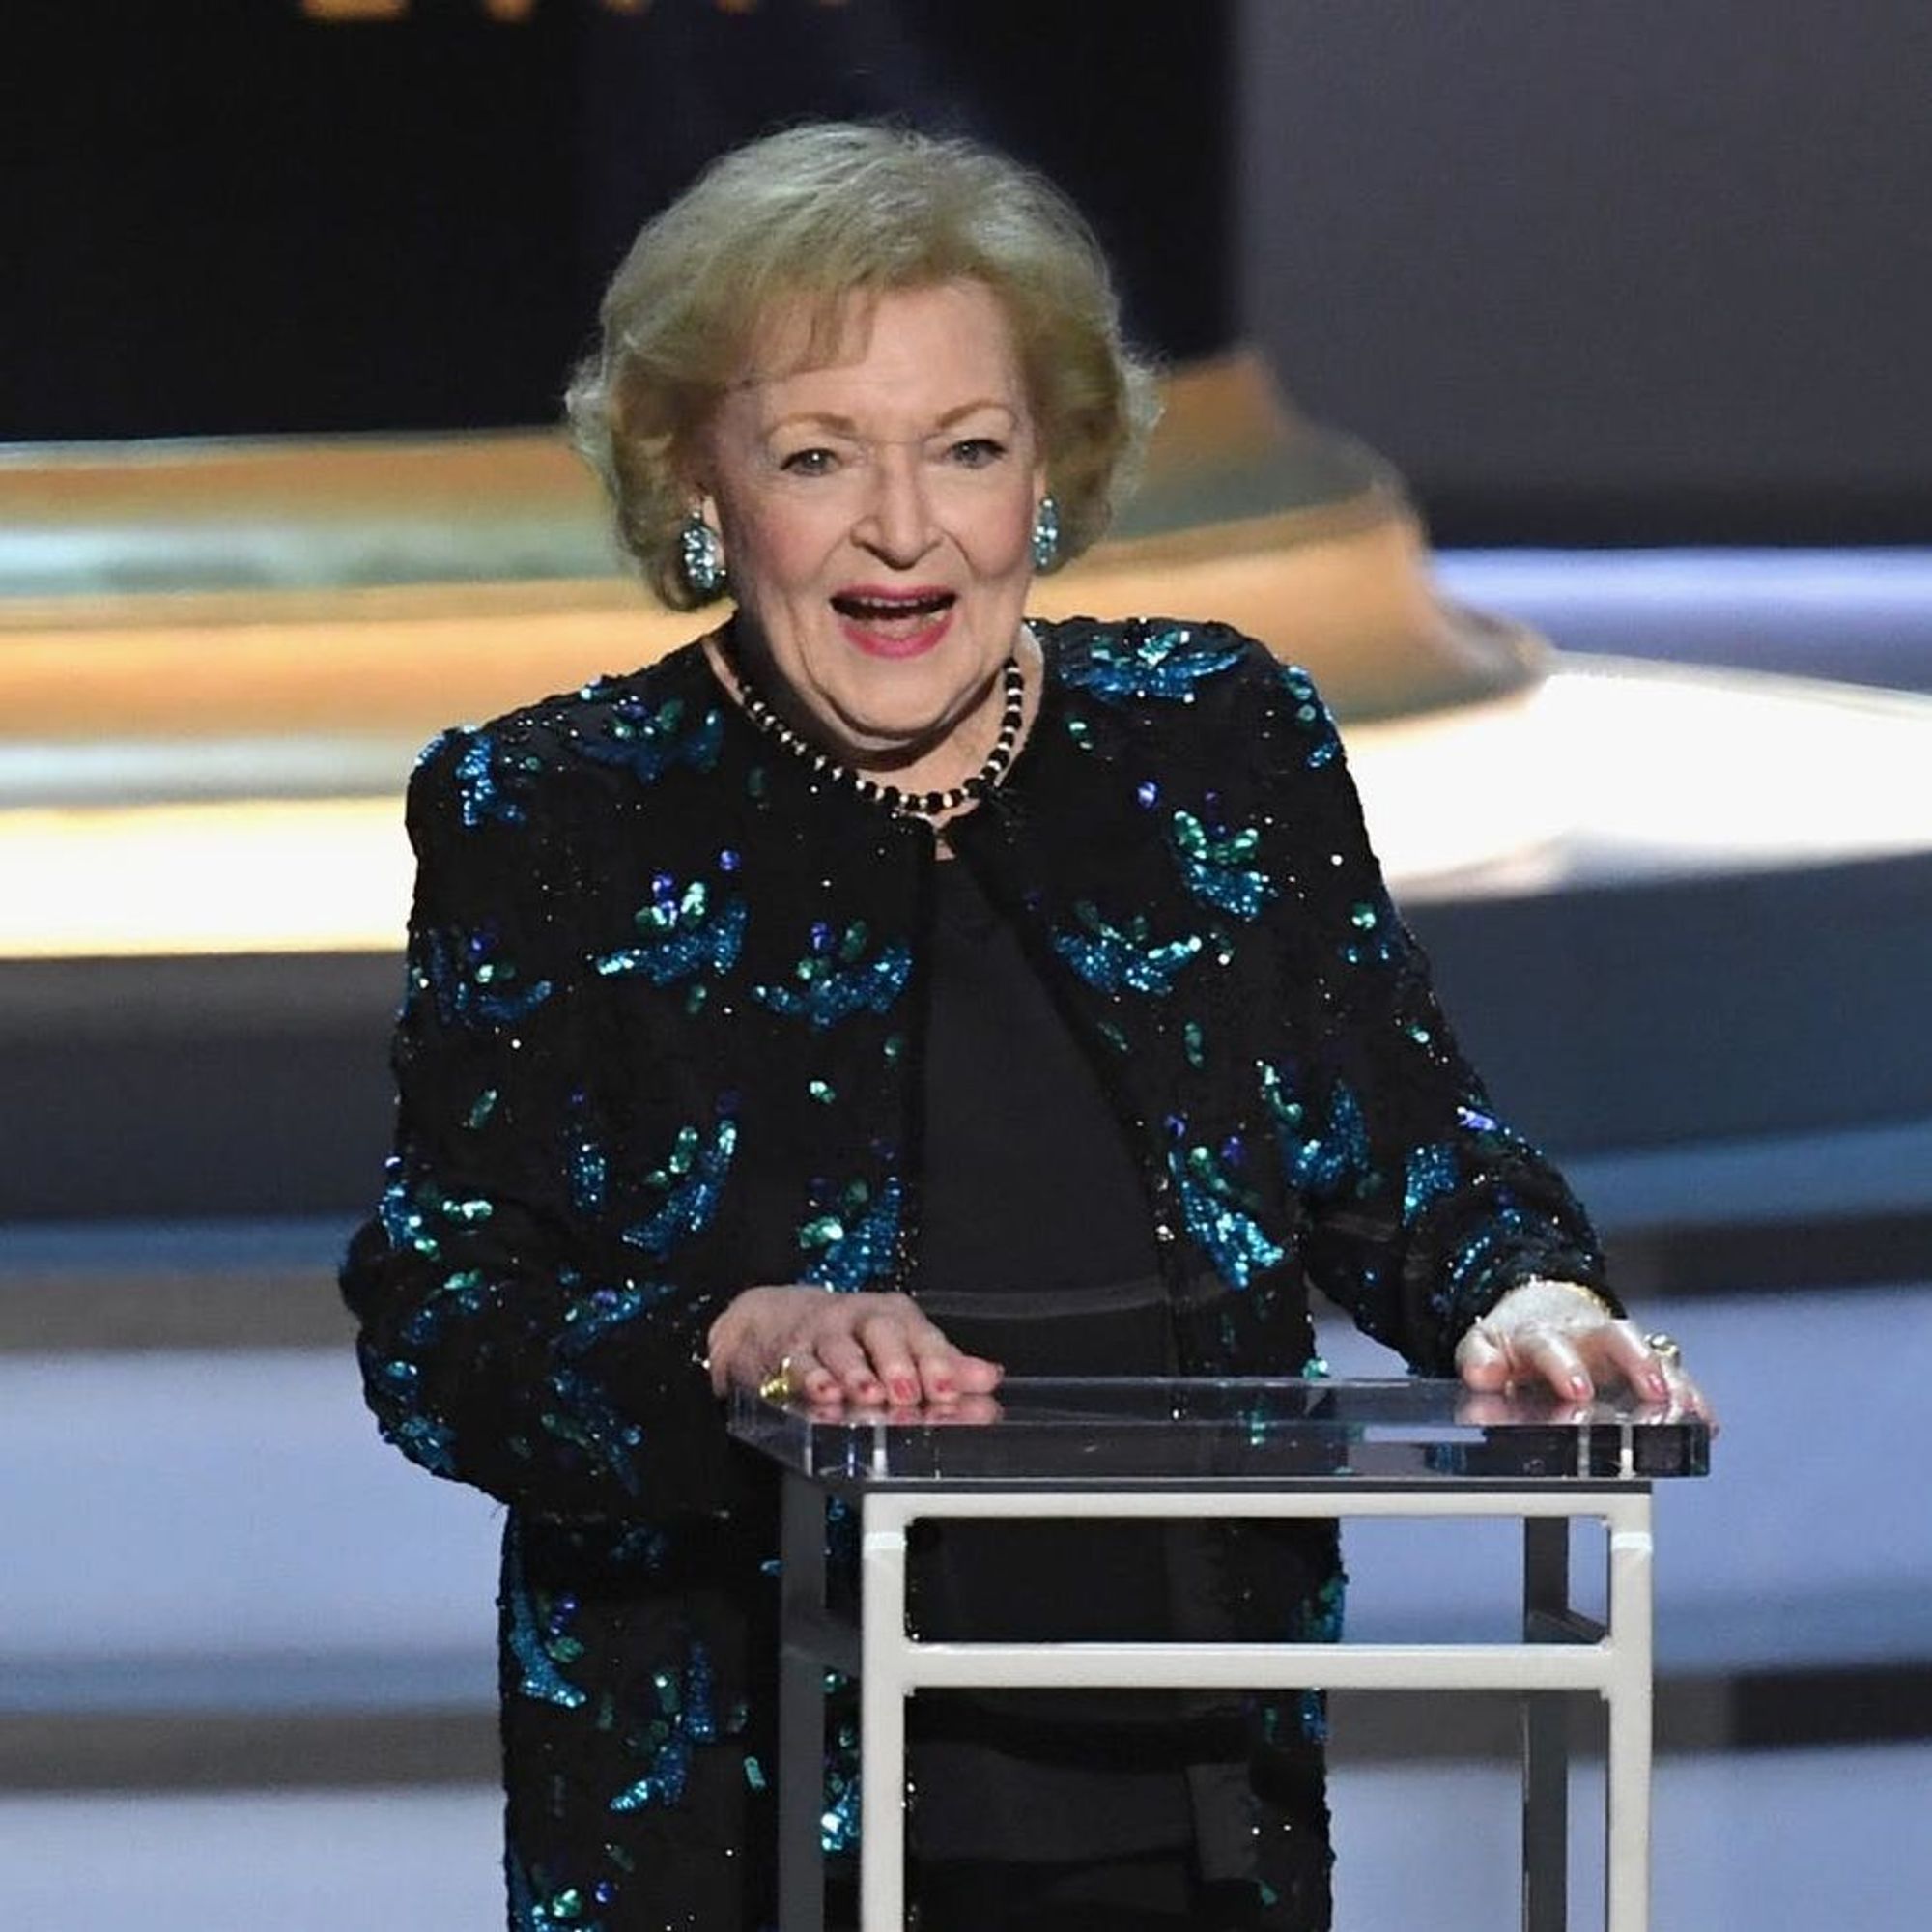 Emmys 2018 Betty White Steals the Show as the ‘First Lady